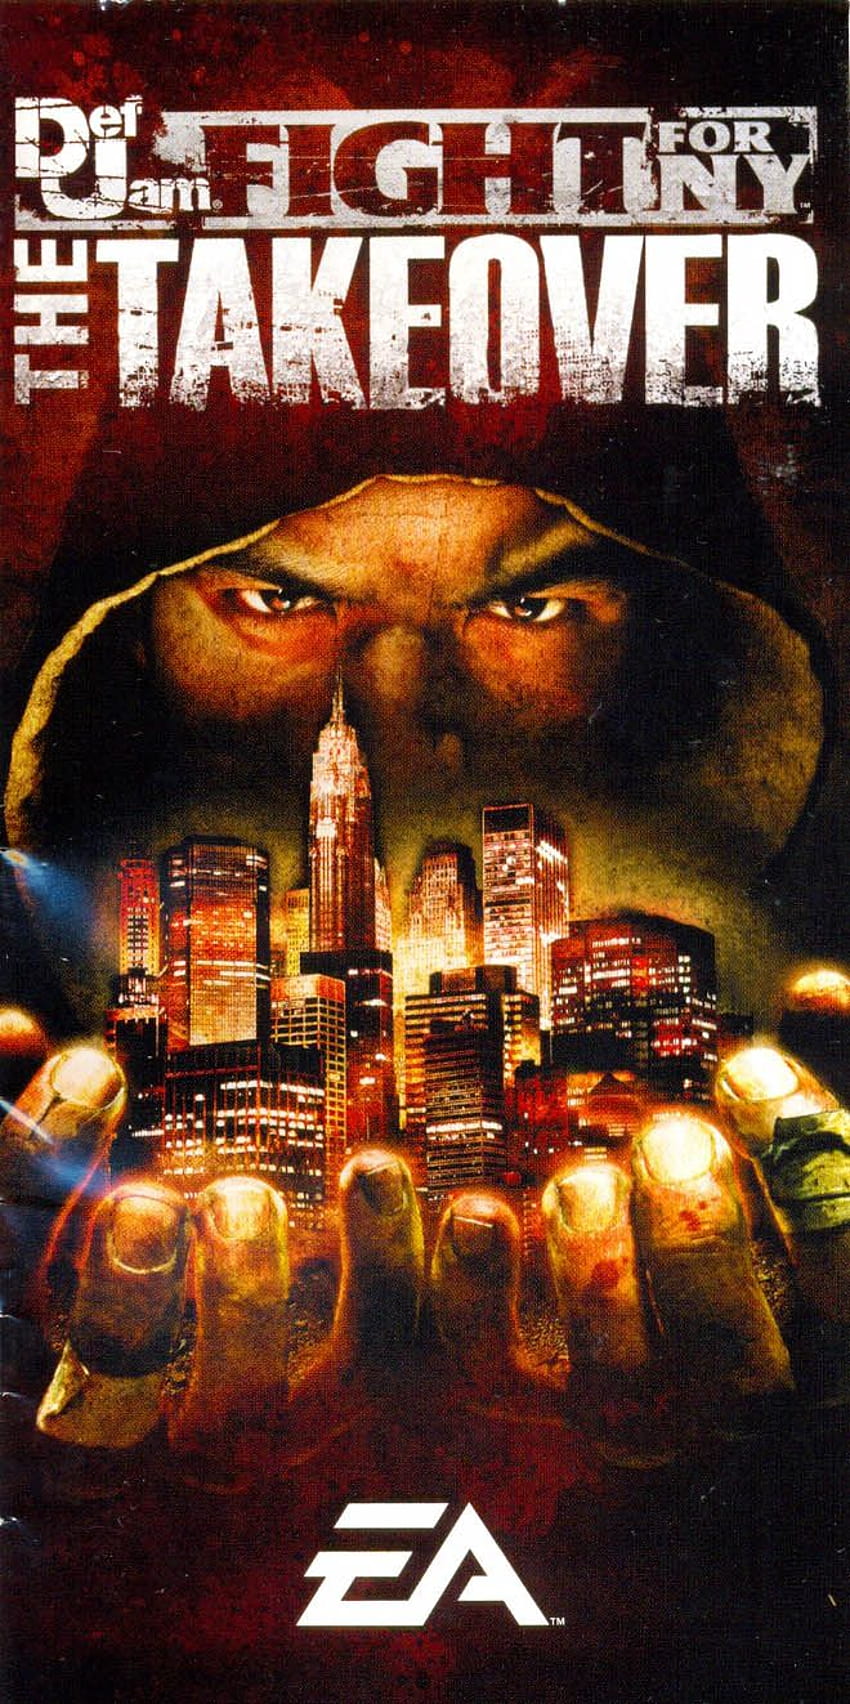 Def Jam: Fight for NY is a brutal, star-heavy classic - Polygon